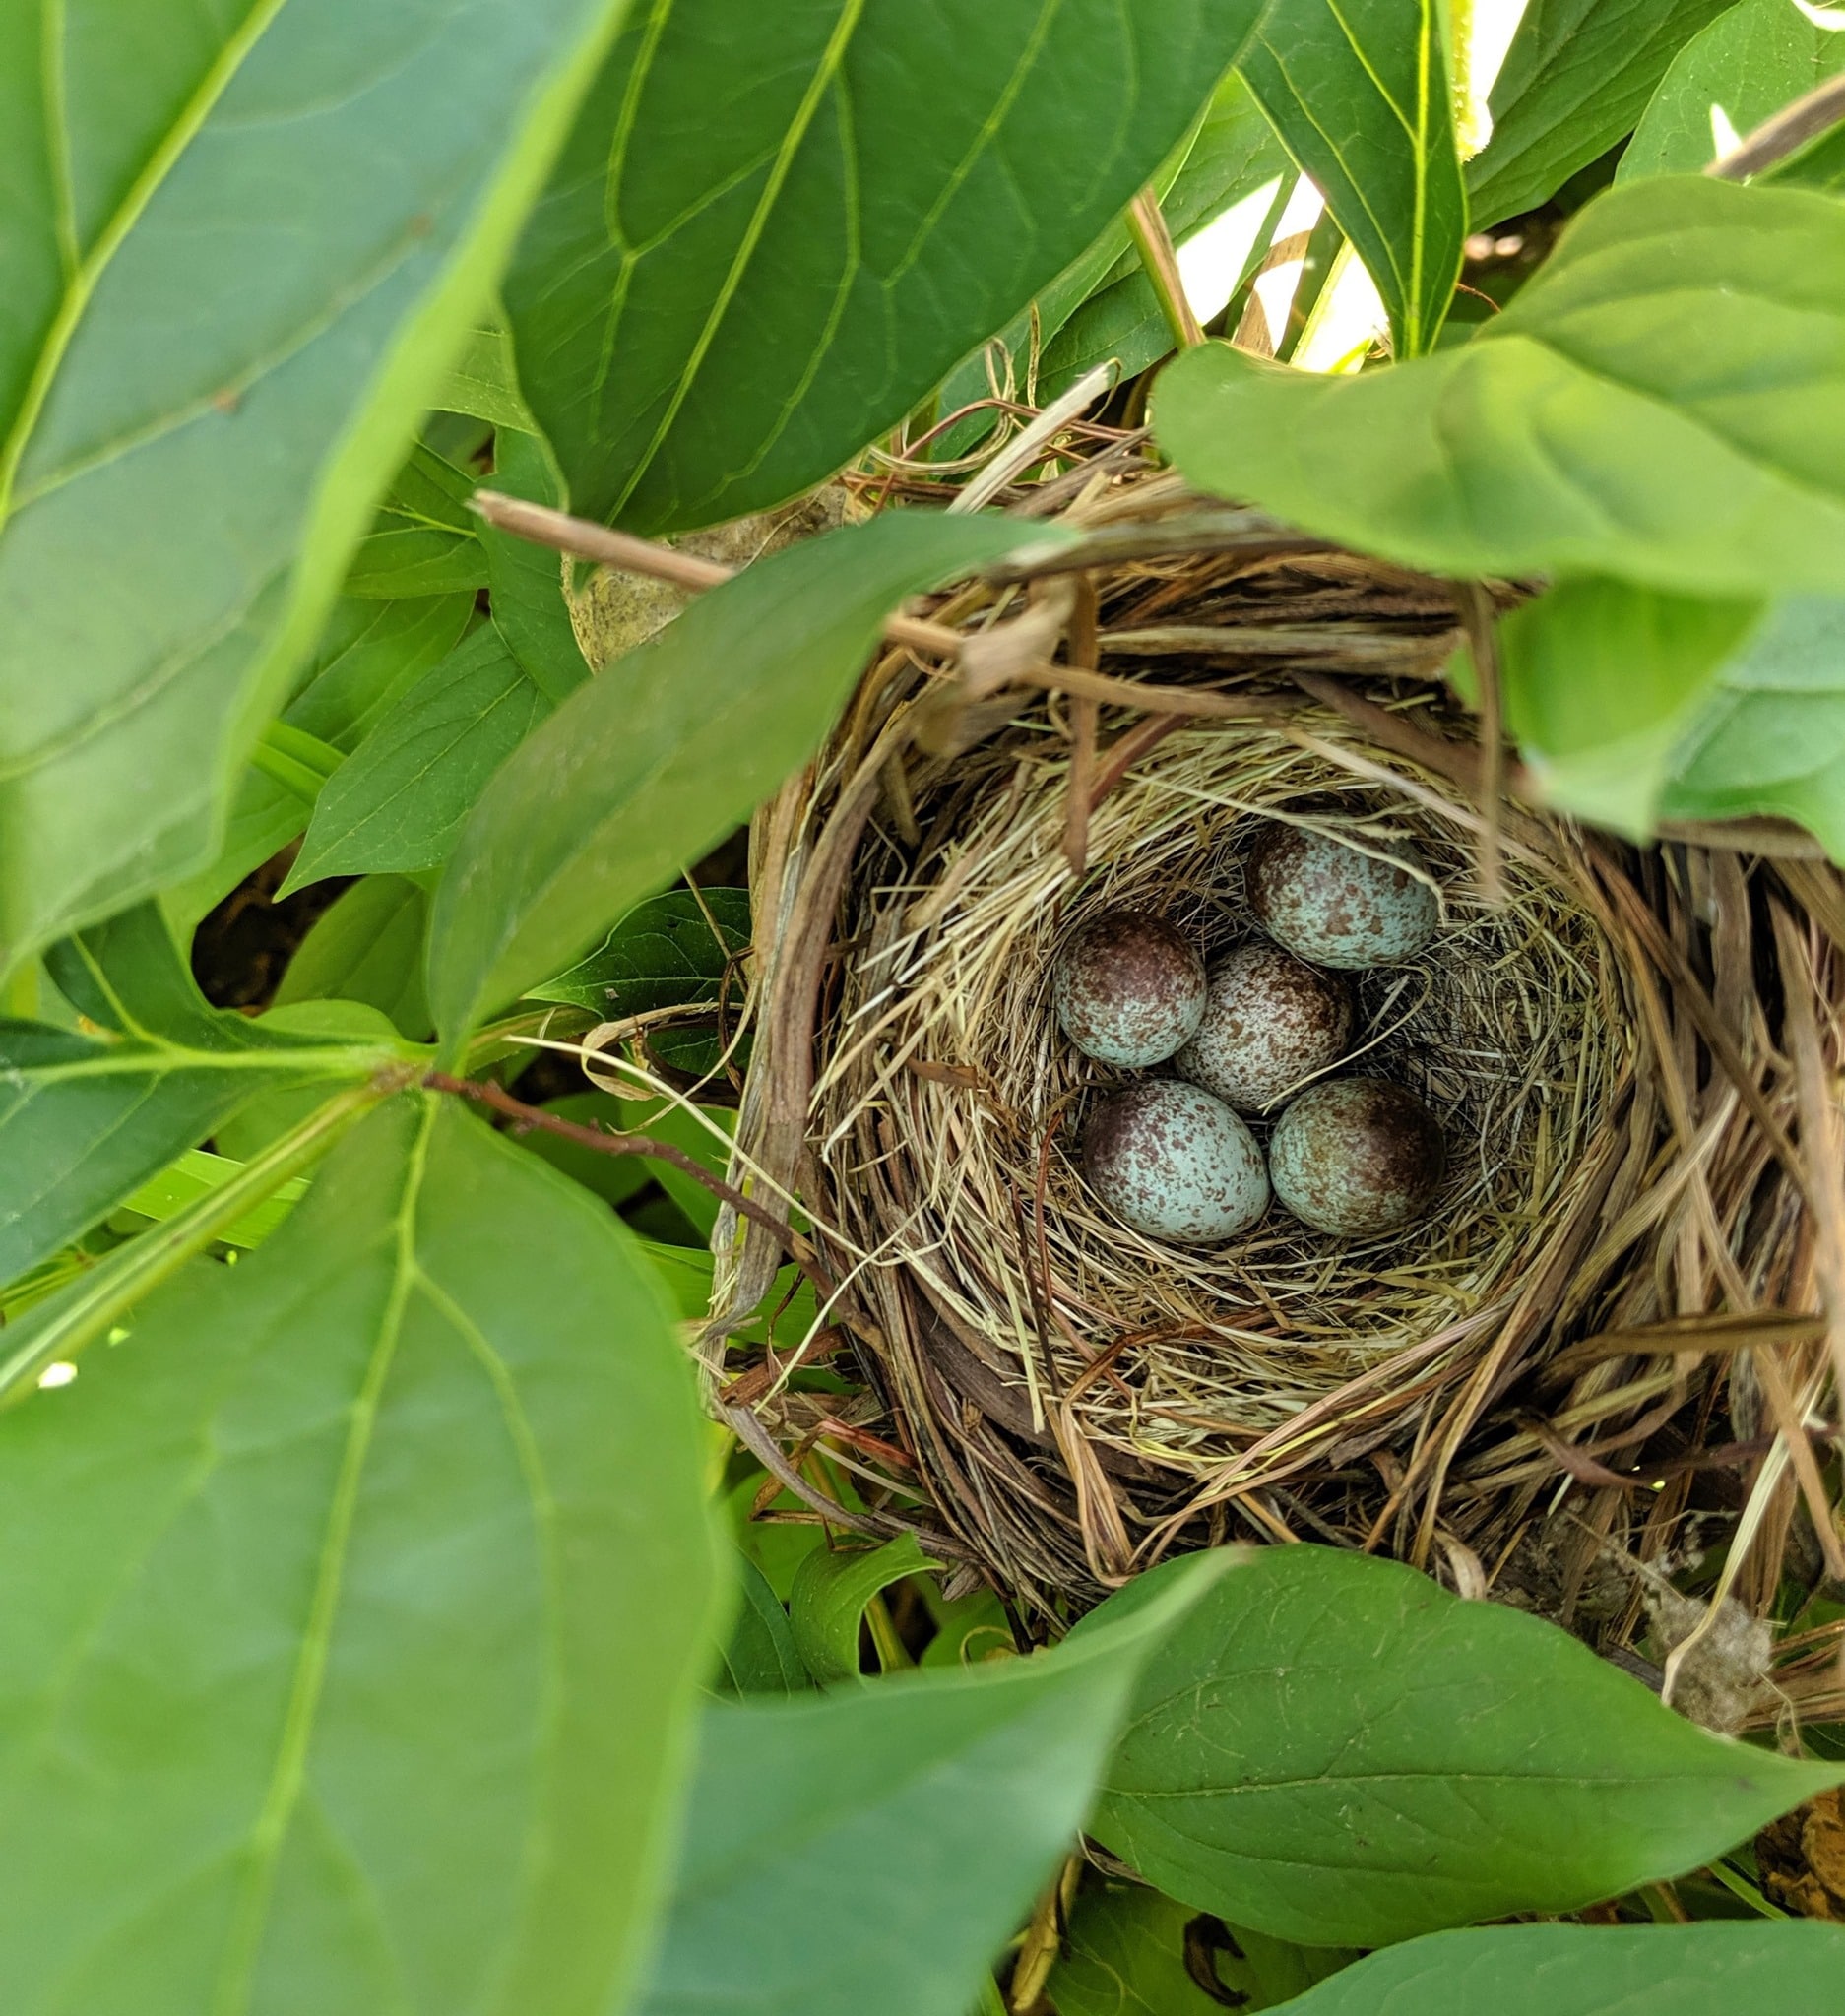 Robin's eggs in a nest